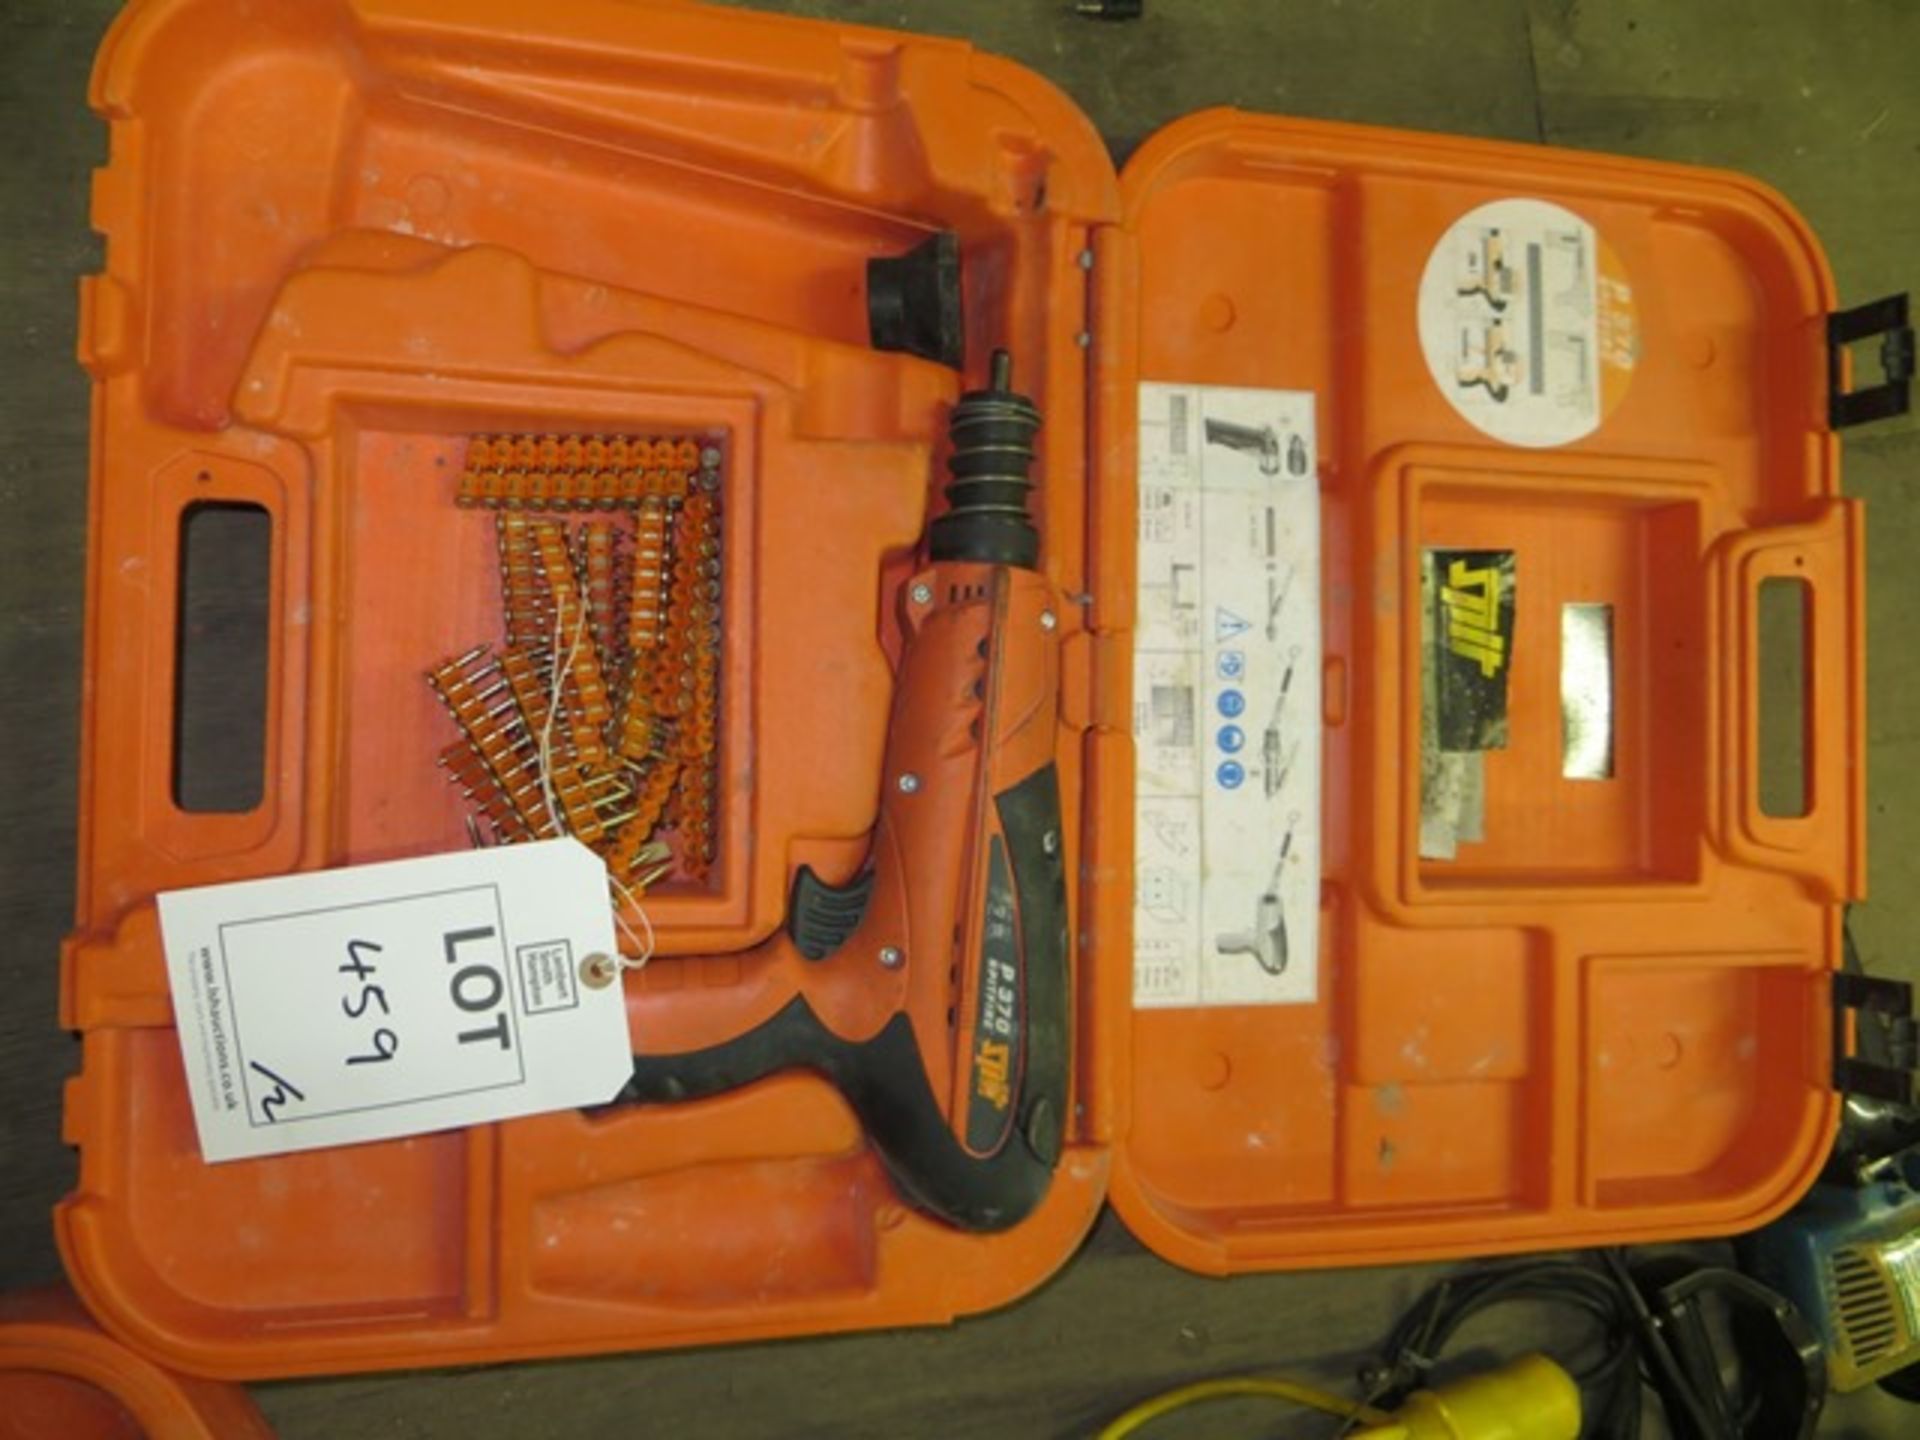 Two Spit Spitfire C60 P370 Nail Guns c/w cases - Image 2 of 2